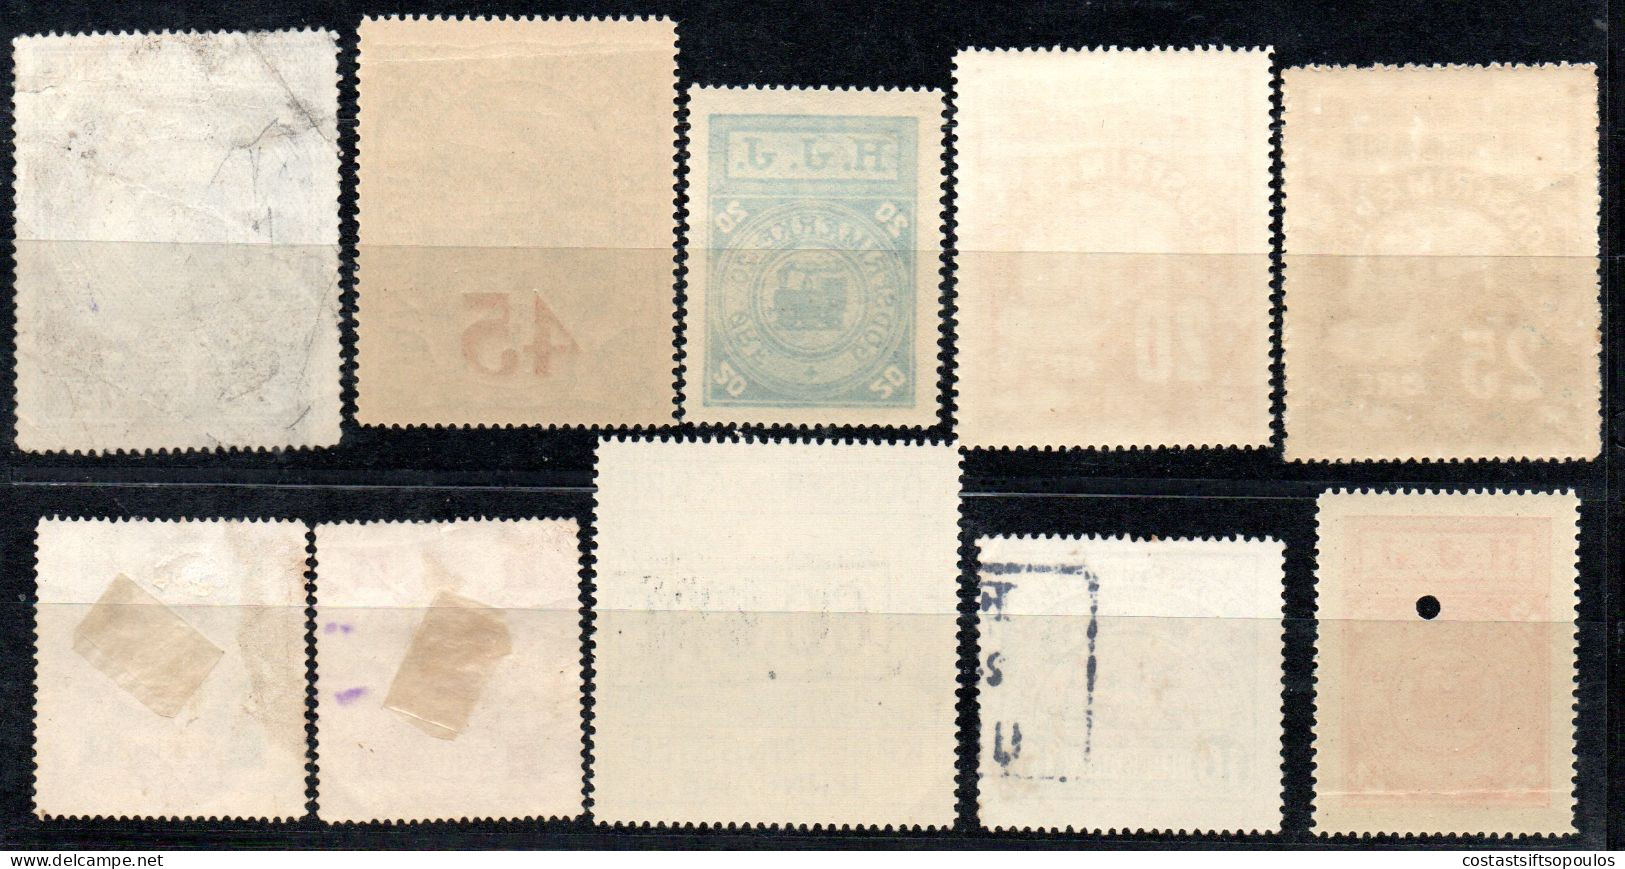 3220.DENMARK,NORWAY 10 RAILWAY,PARCEL POST LOT,6 MNH - Europe (Other)